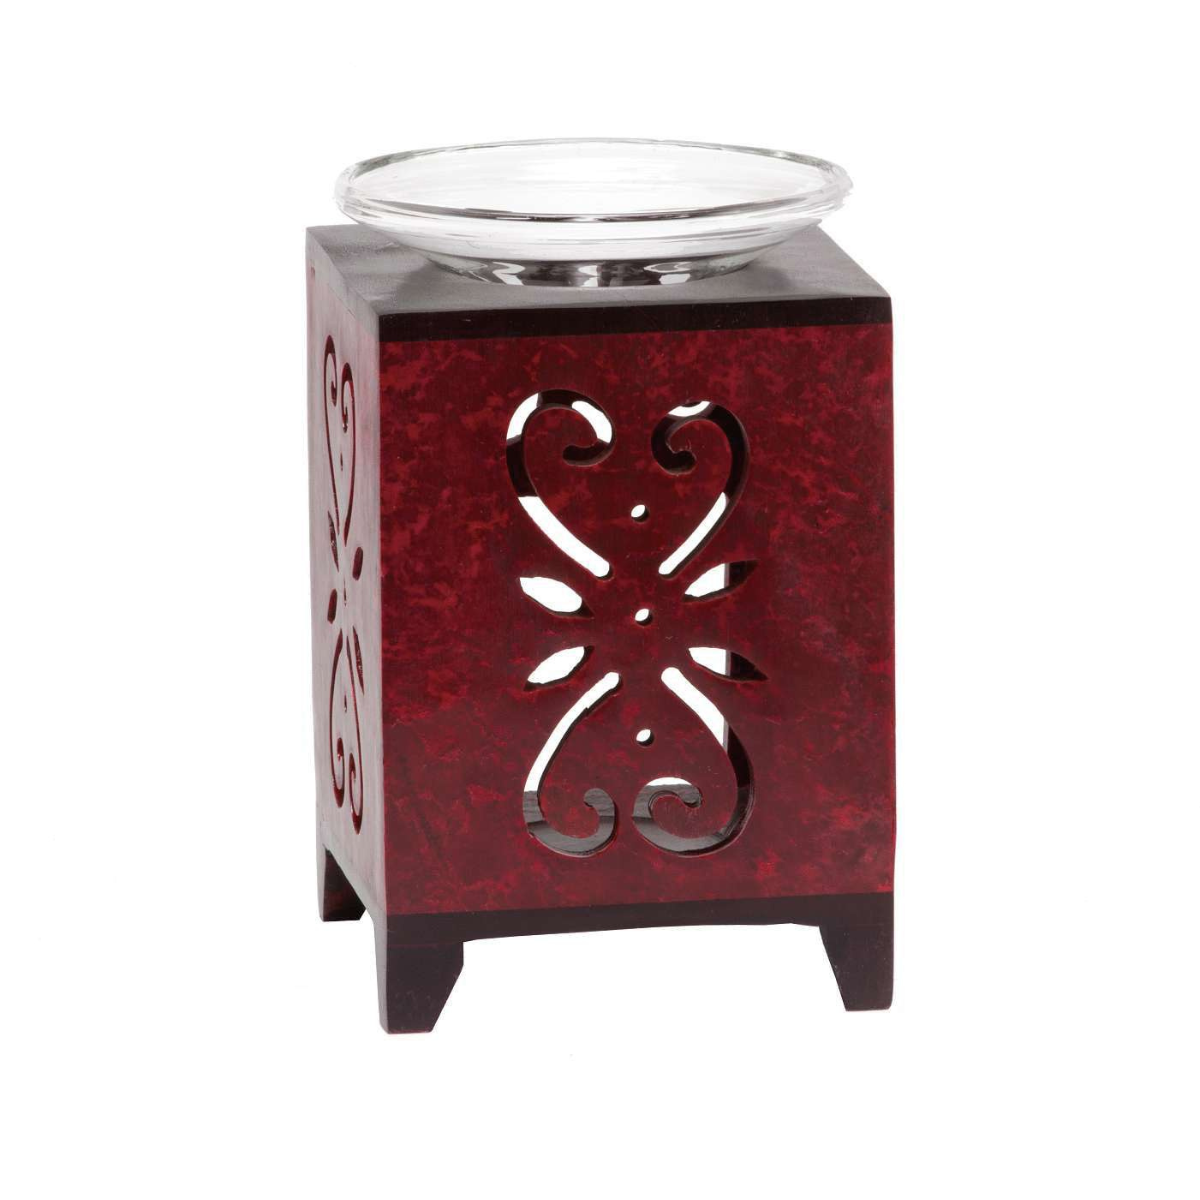 Aromatherapy Diffuser- Scrollwork